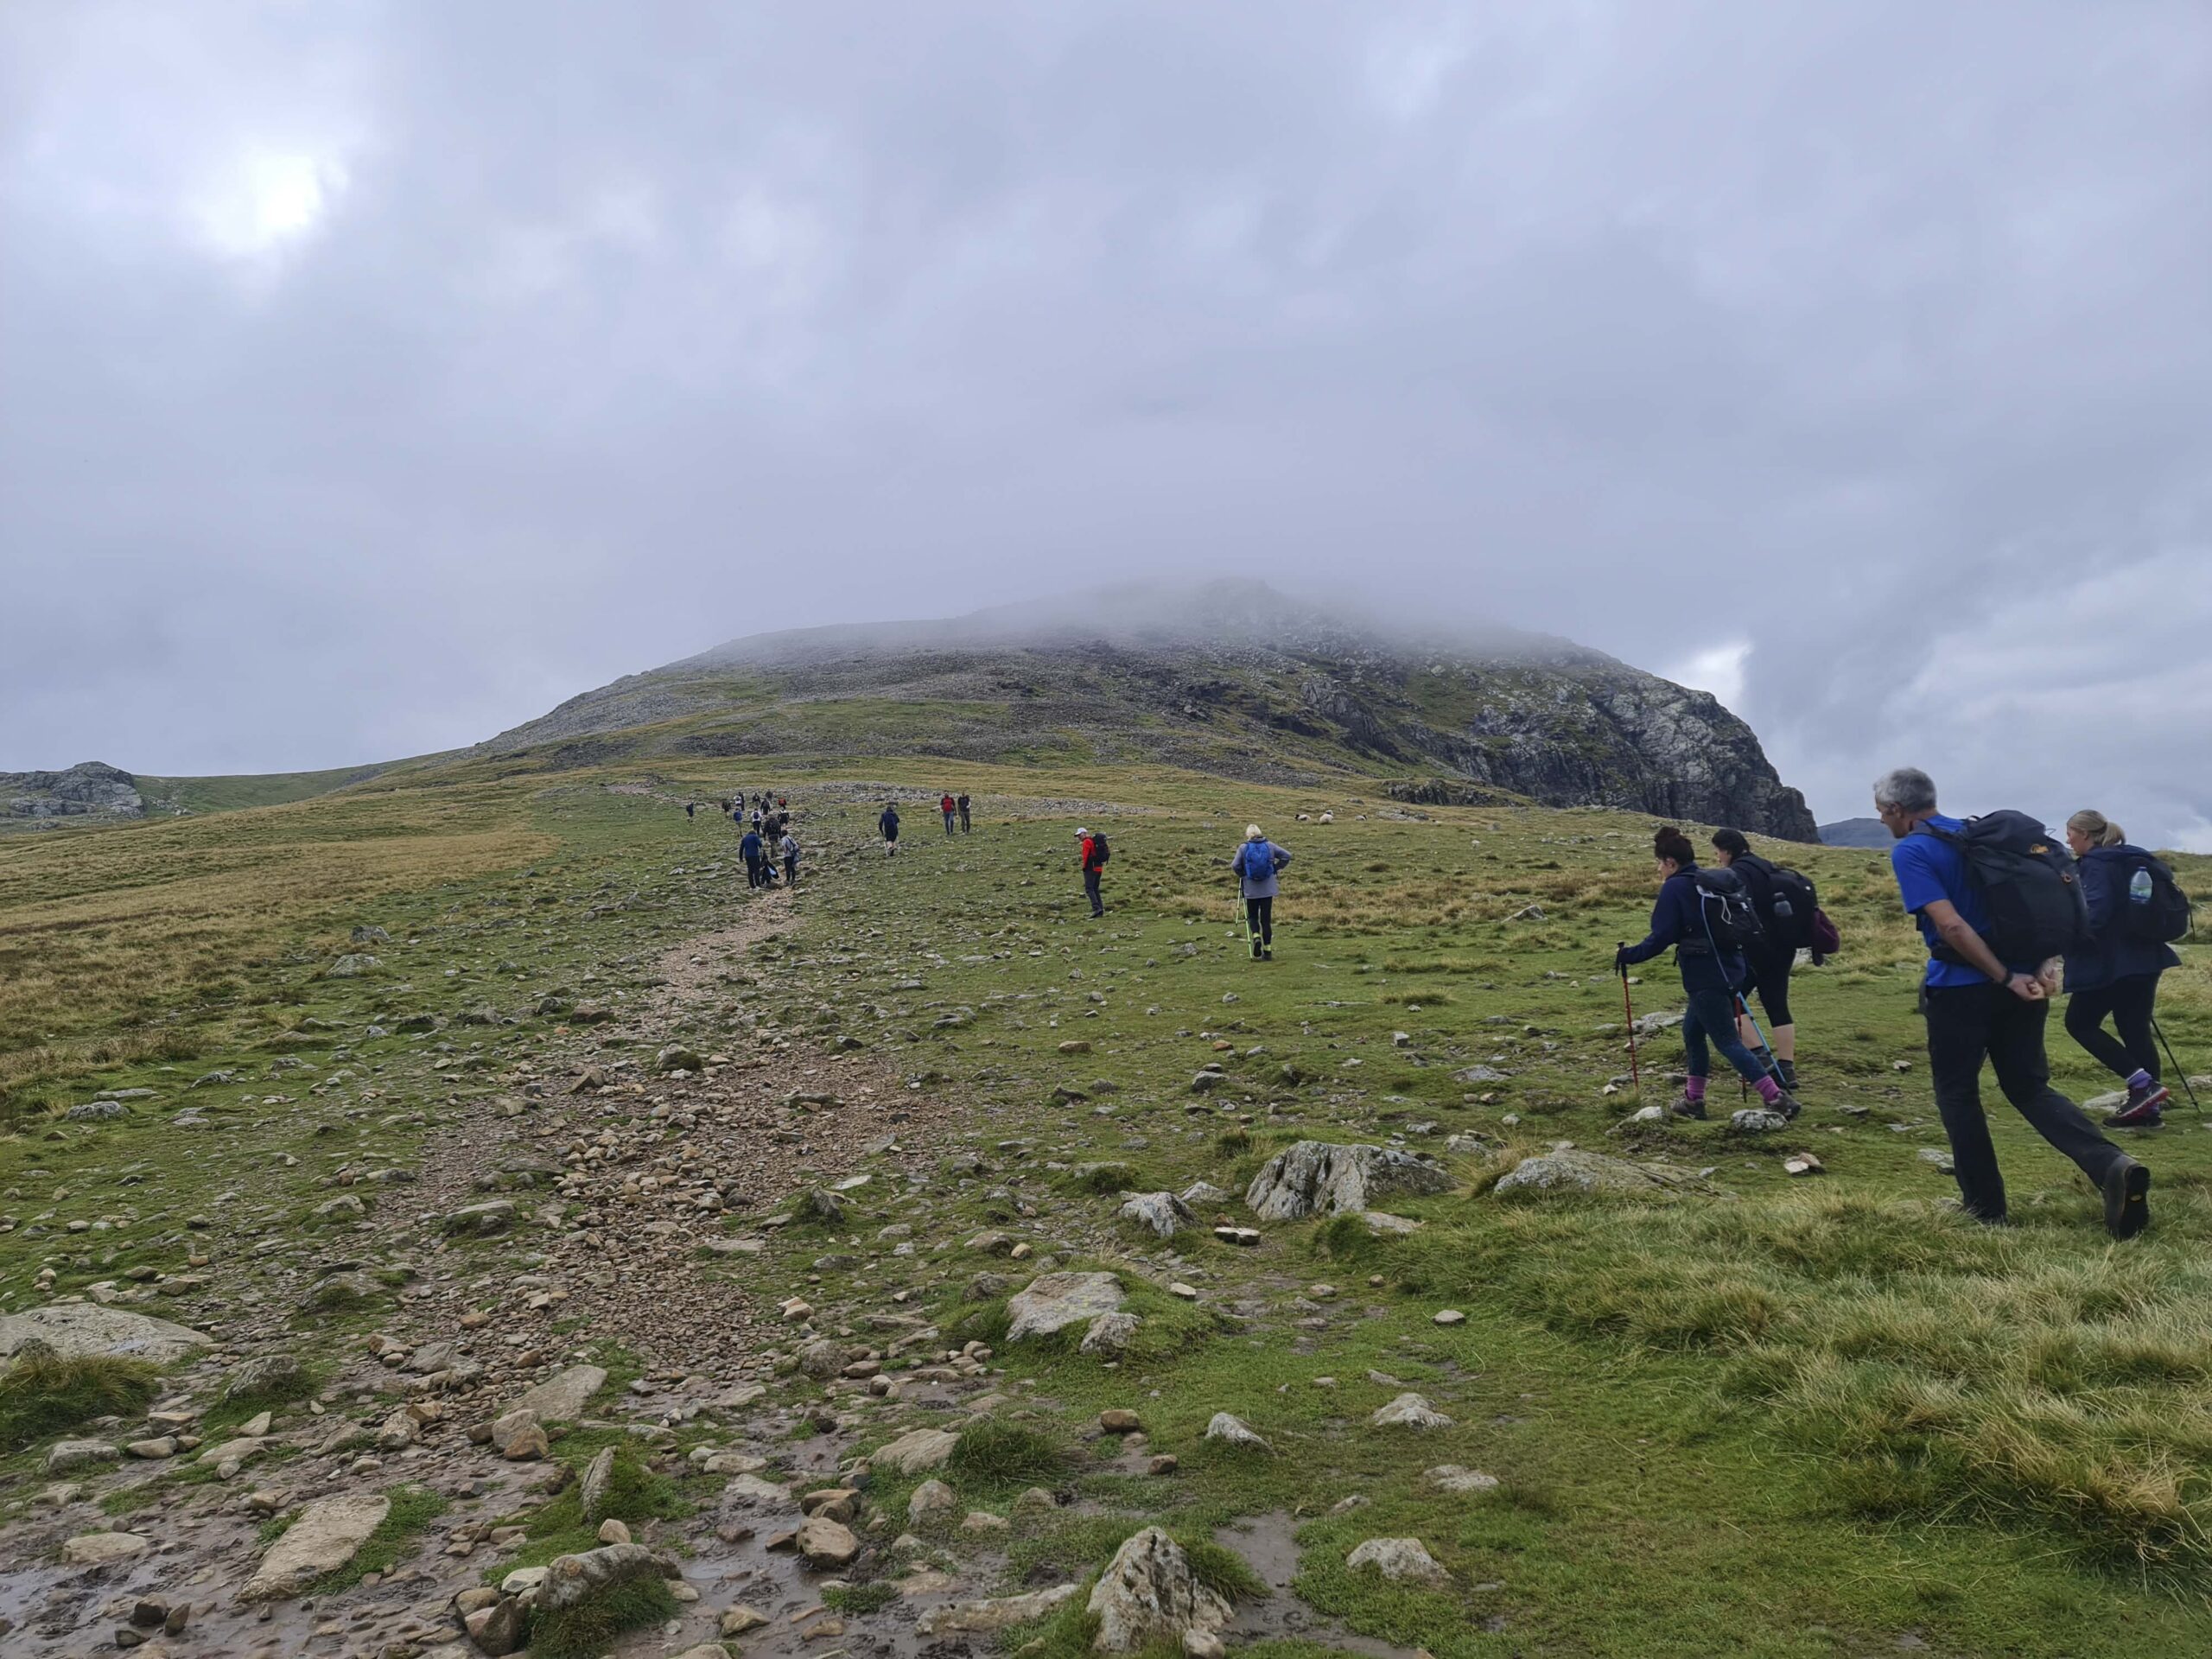 Getting closer to Scafell